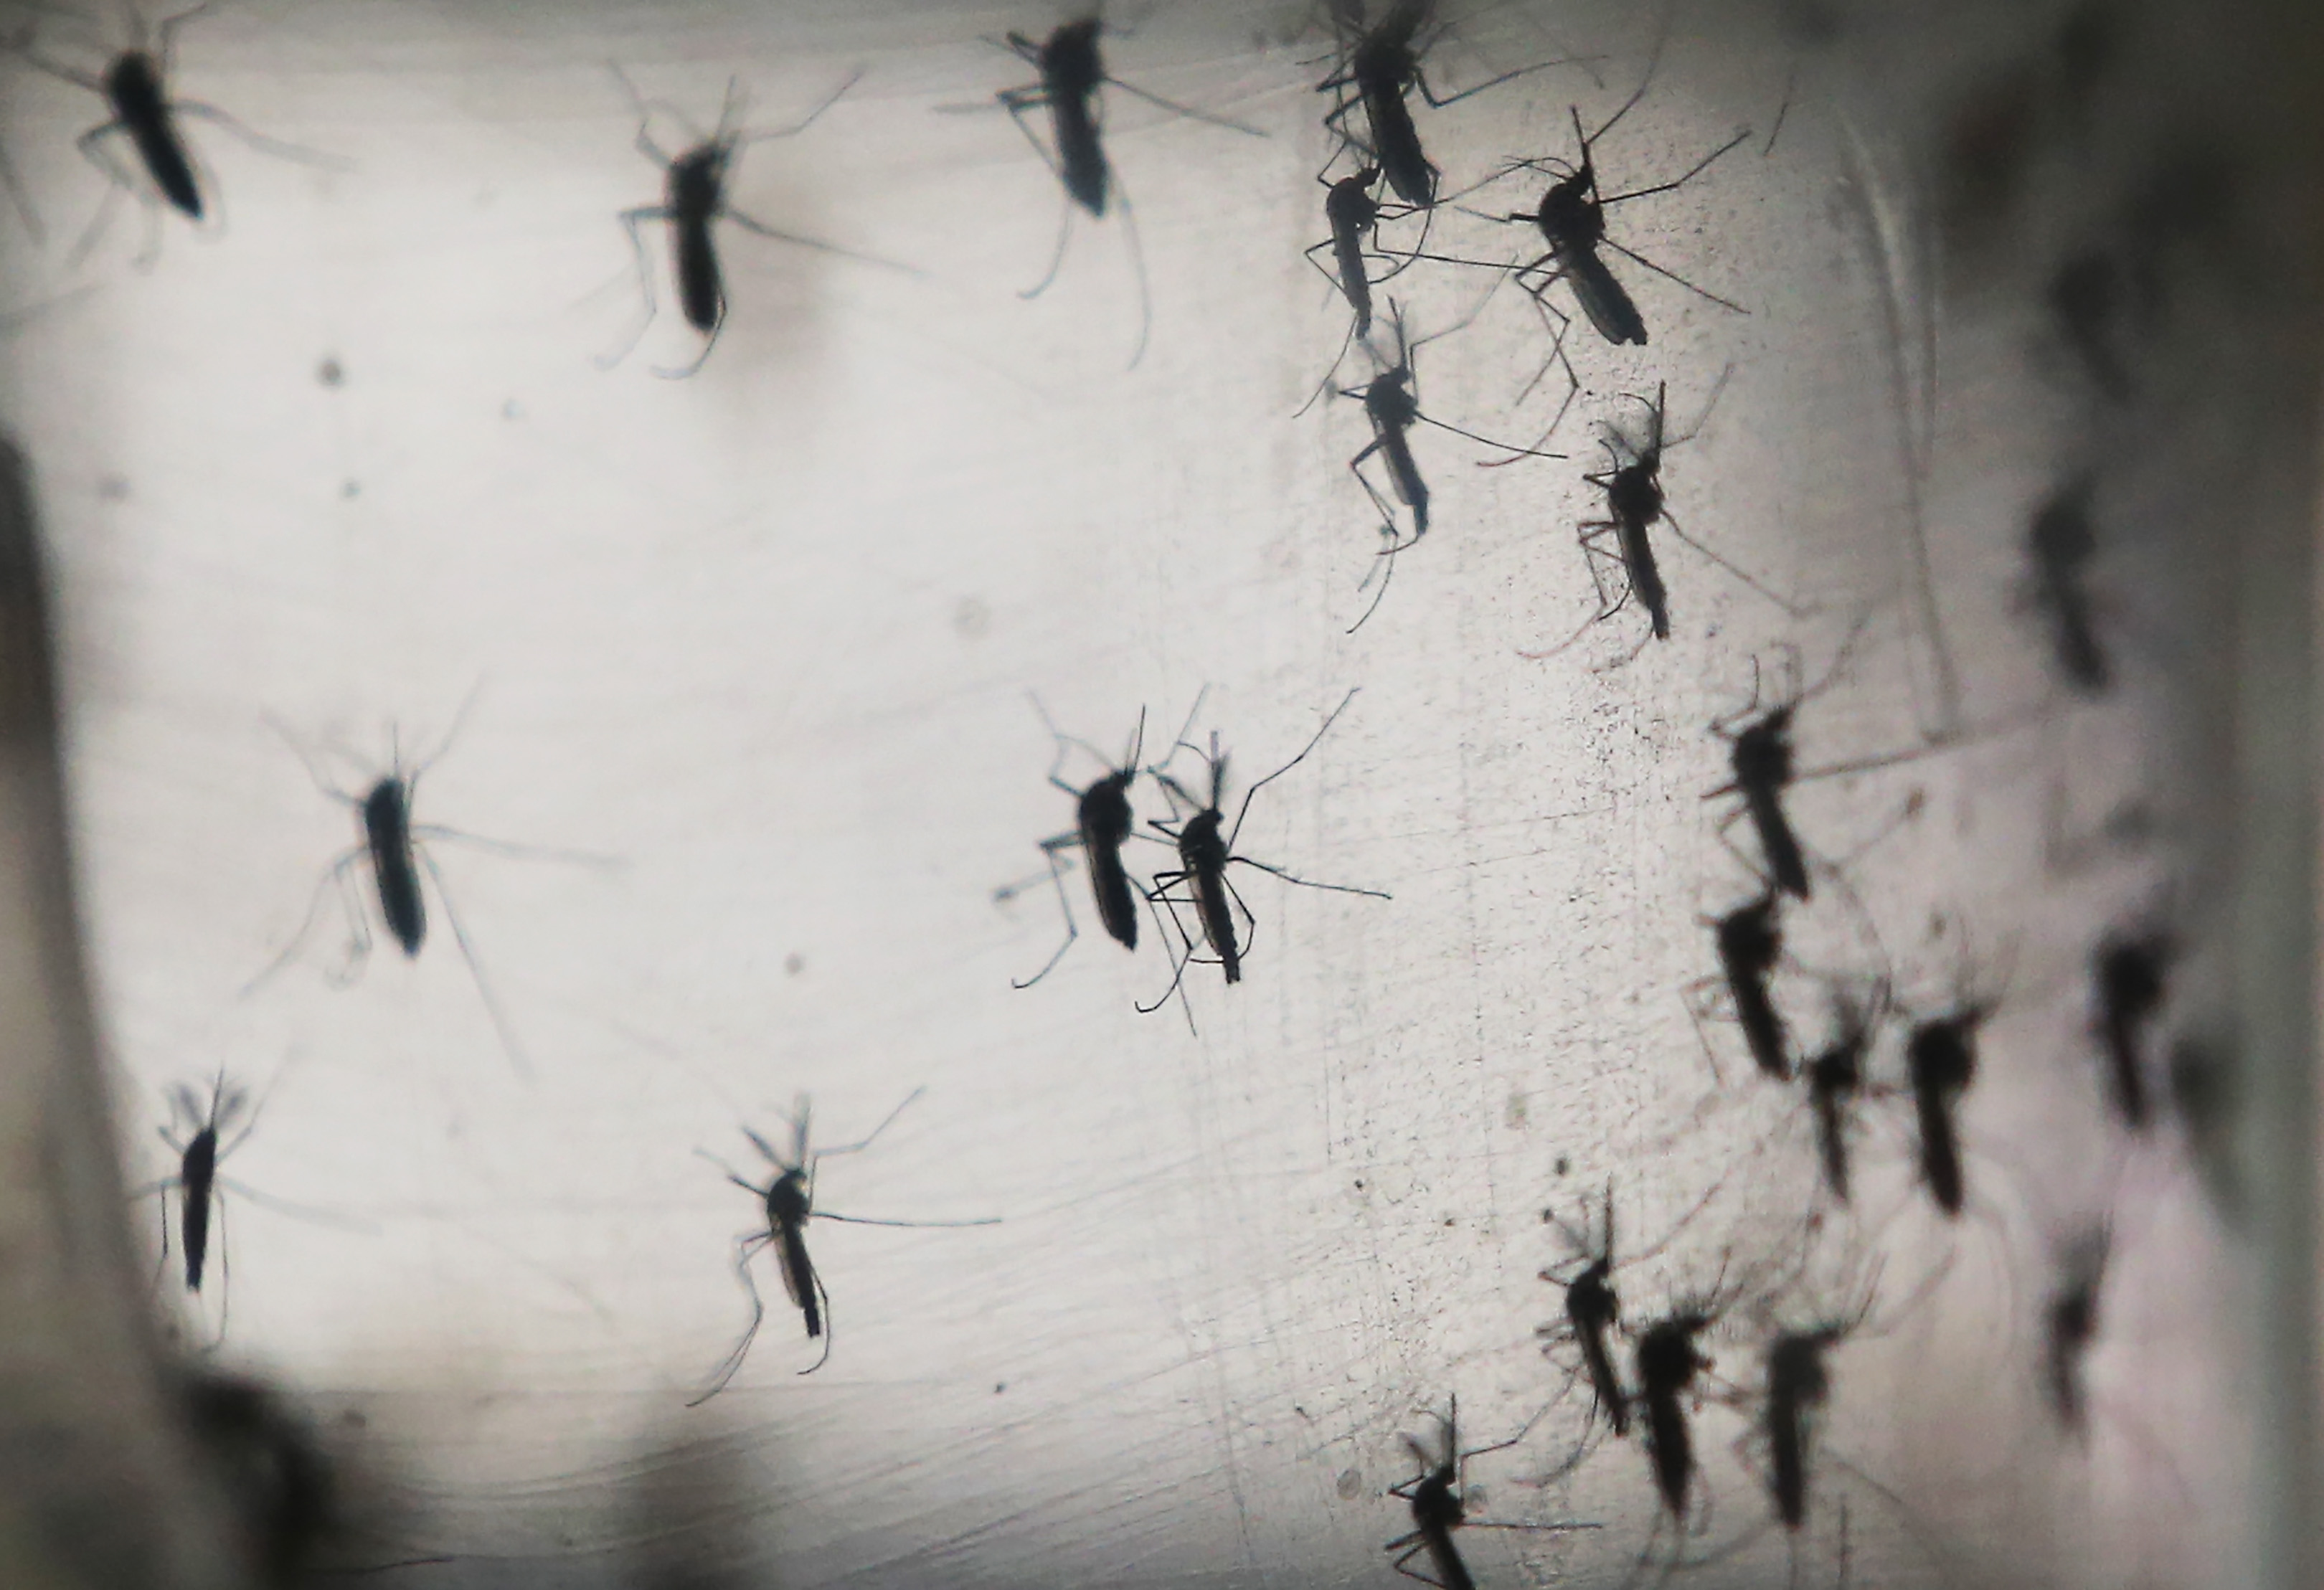 Aedes aegypti mosquitos are seen in a lab at the Fiocruz institute in Recife, Pernambuco state, Brazil on Jan. 26, 2016. The mosquito transmits the Zika virus and is being studied at the institute. (Mario Tama—Getty Images)